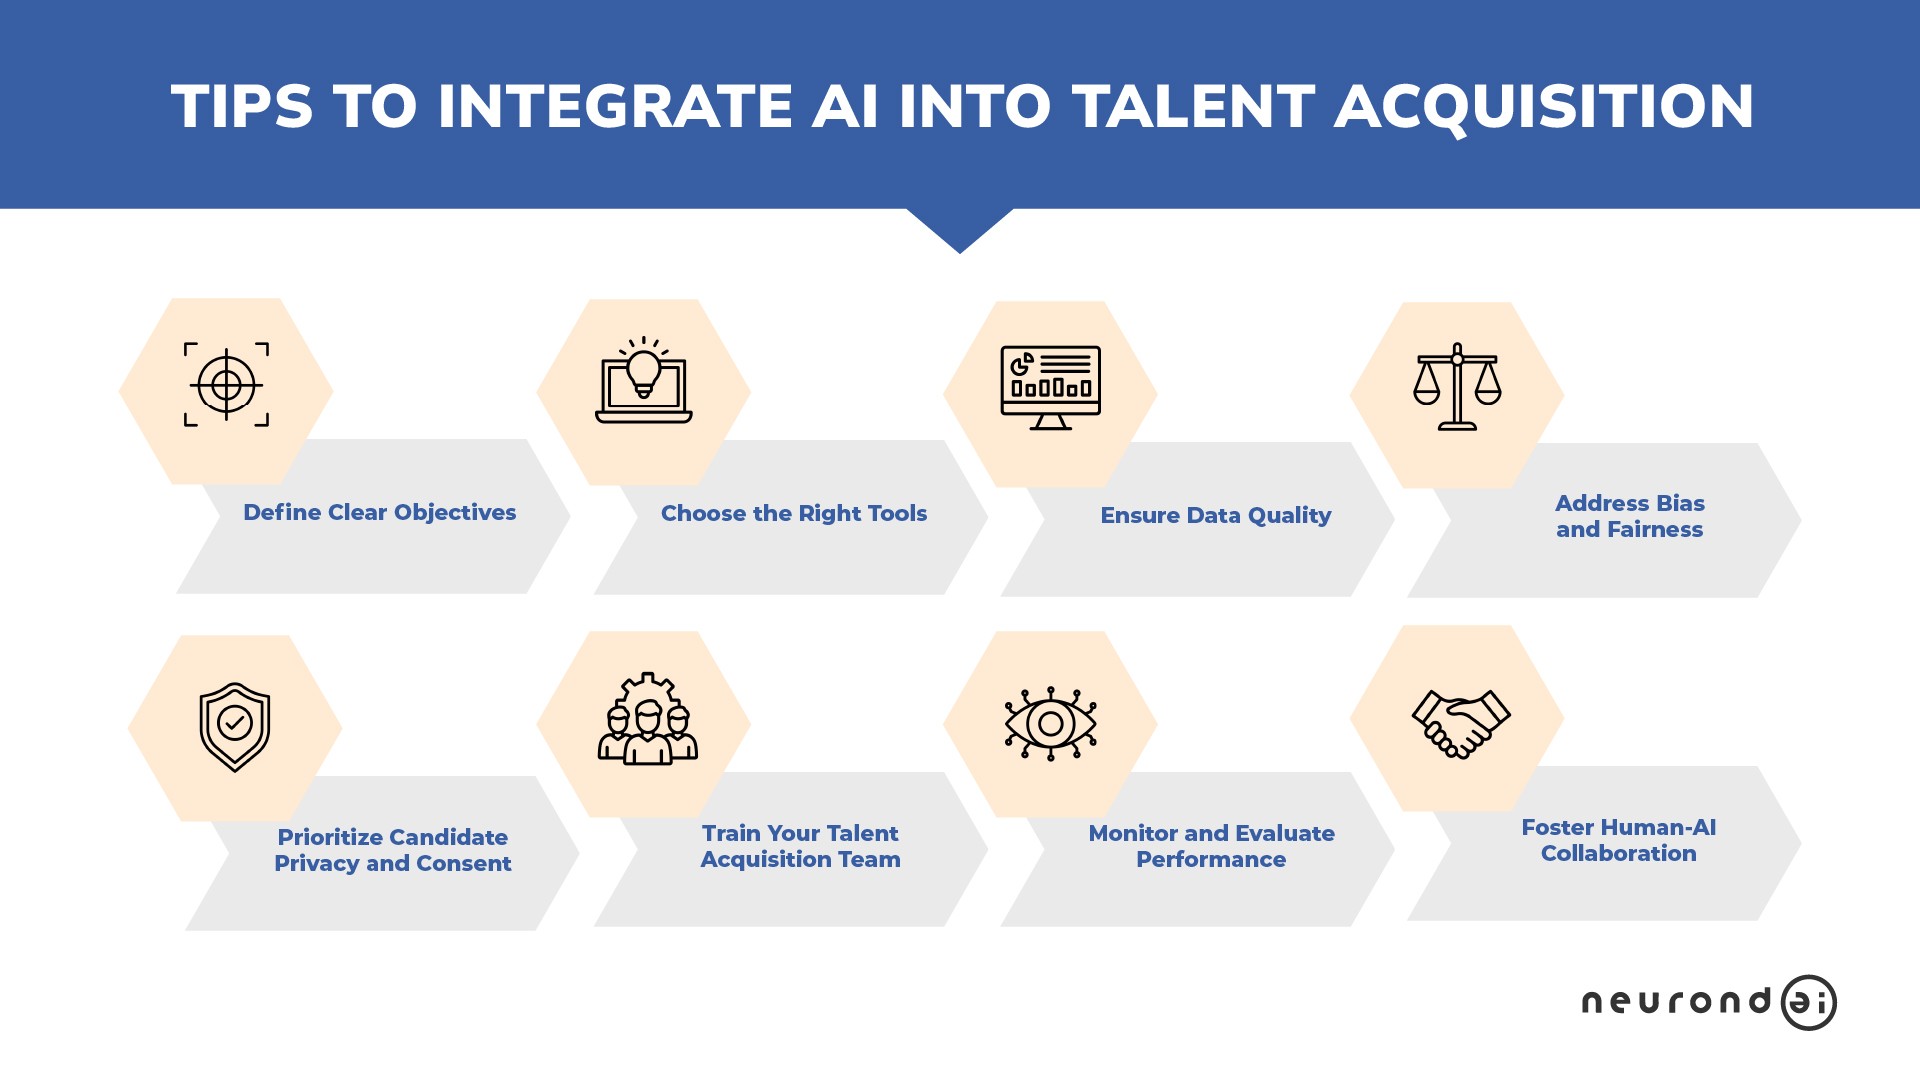 Tips for Integrating AI into Talent Acquisition